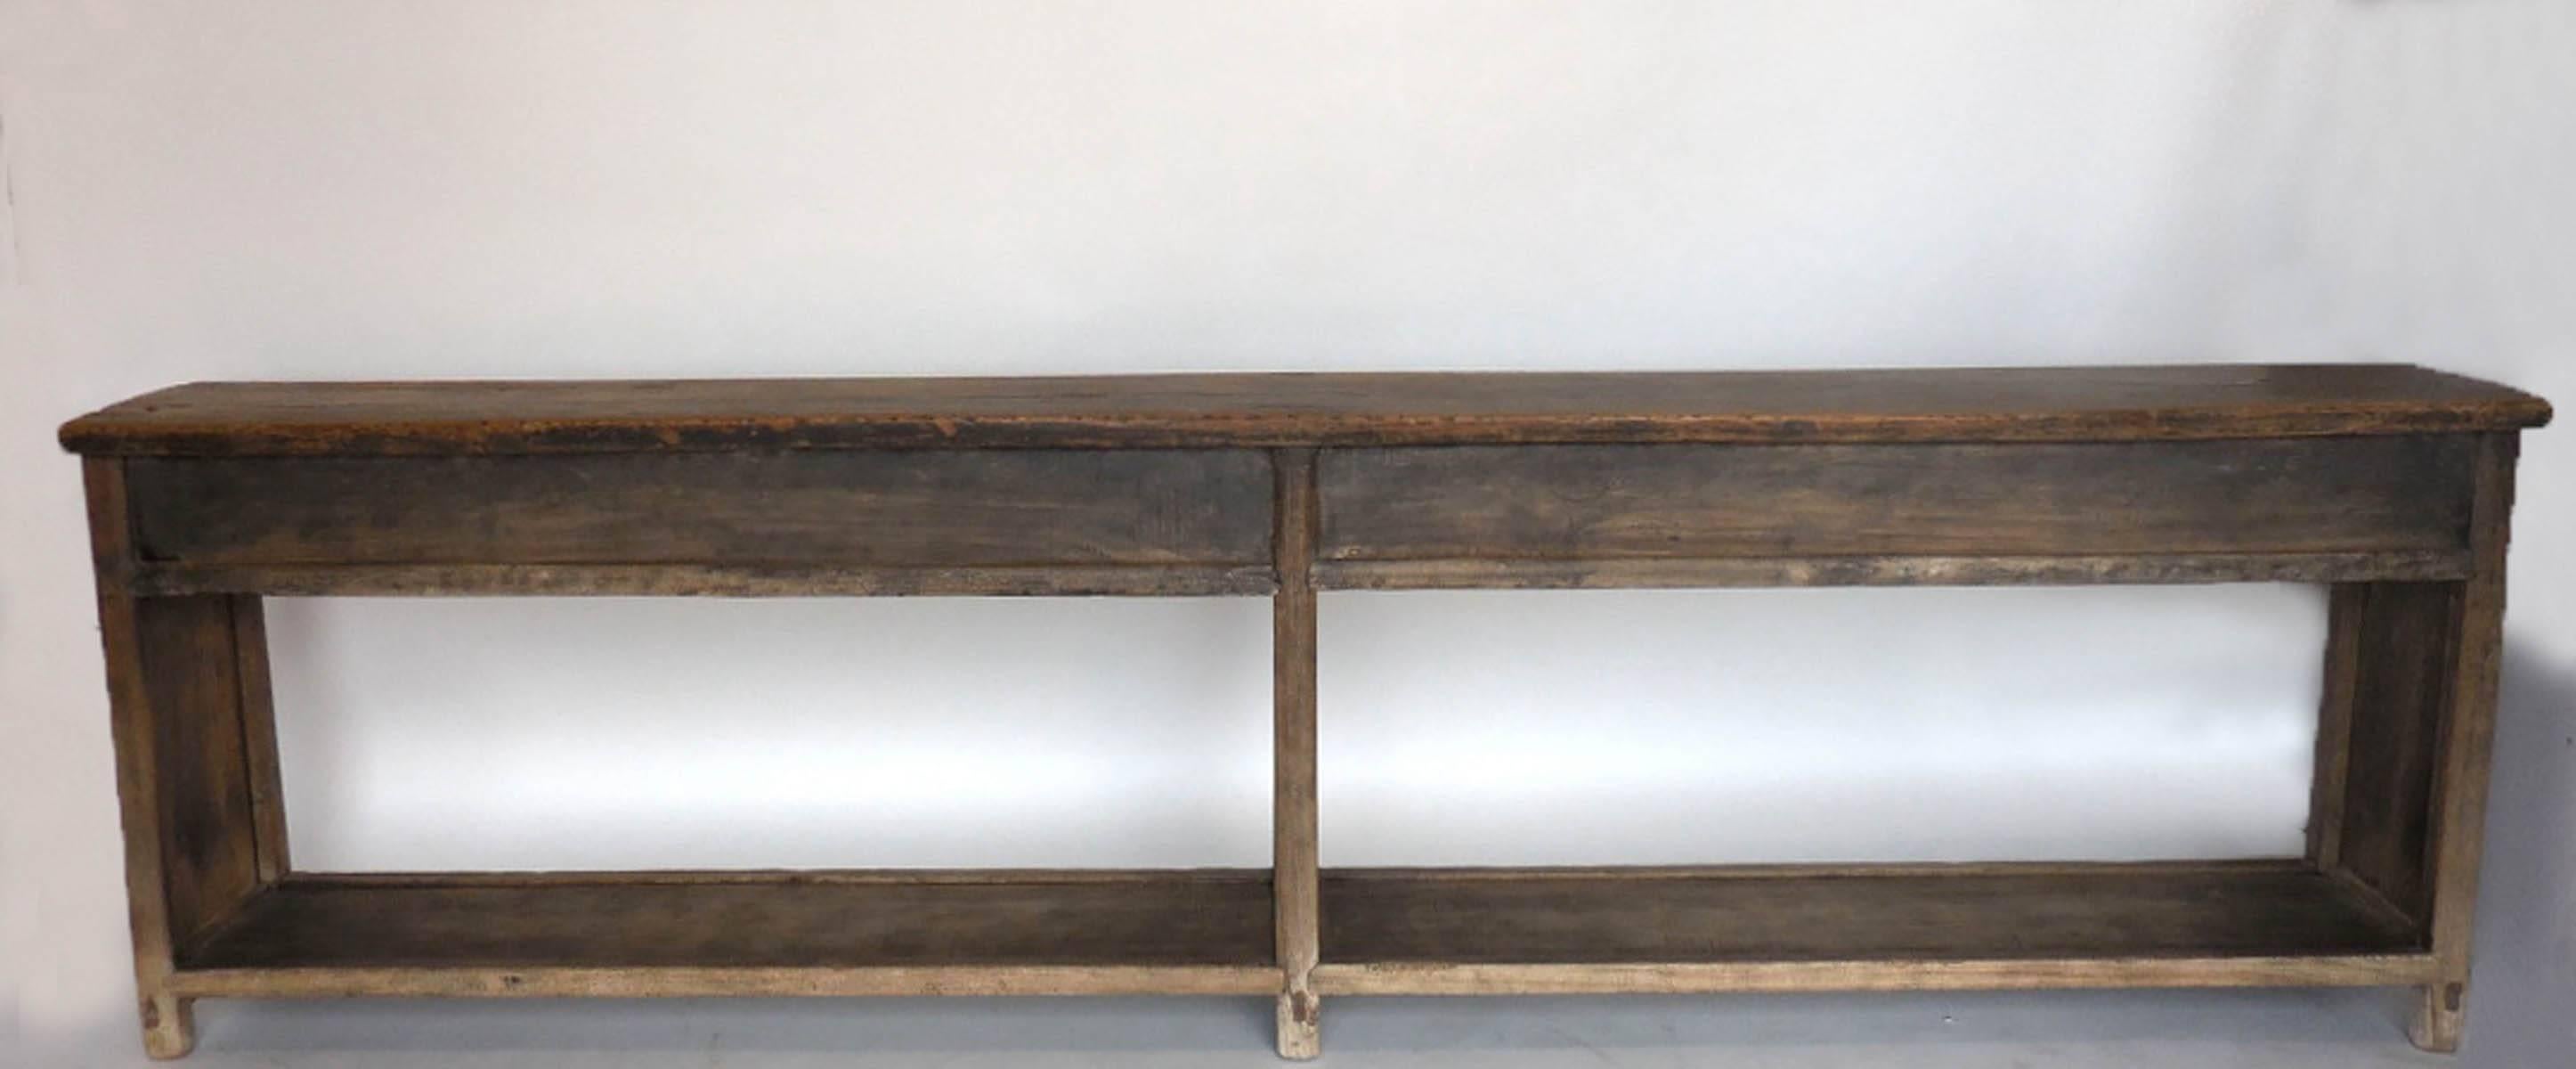 Chinese 19th Century Very Long Elm Console with Drawers